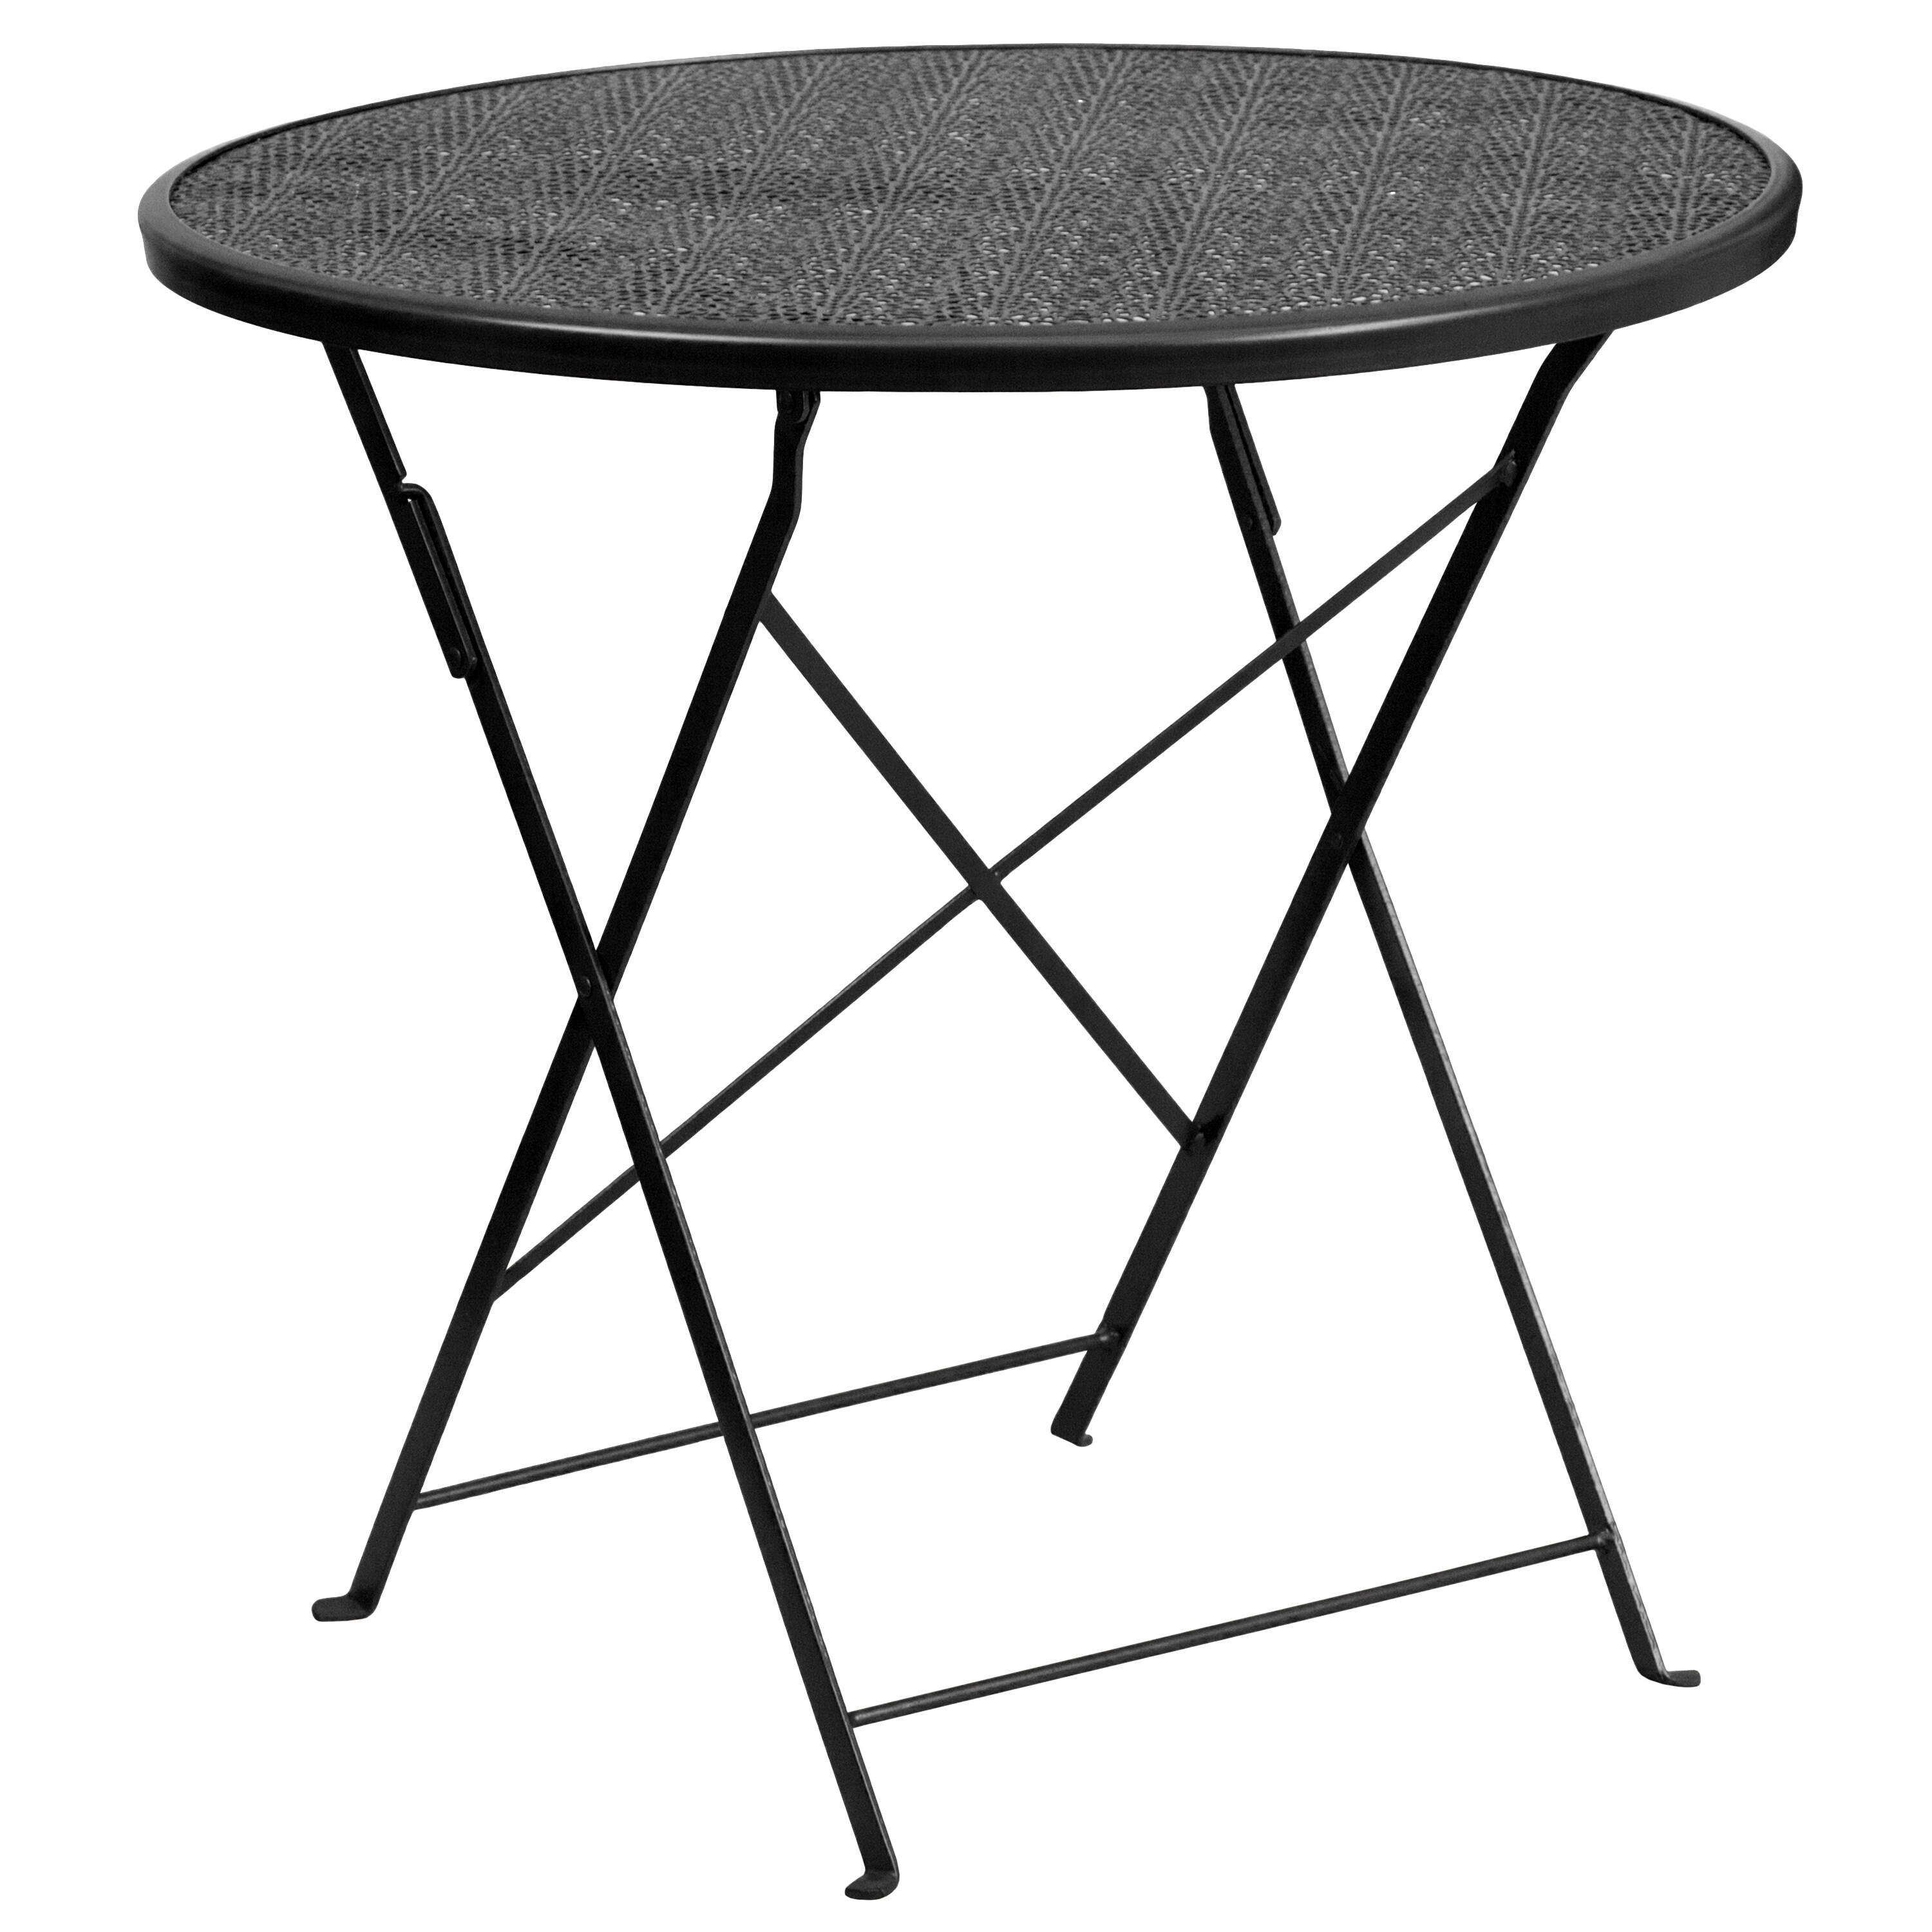 Flash Furniture 30-in. Round Steel Folding Patio Table Set w/ 4 Chairs Black - image 5 of 5